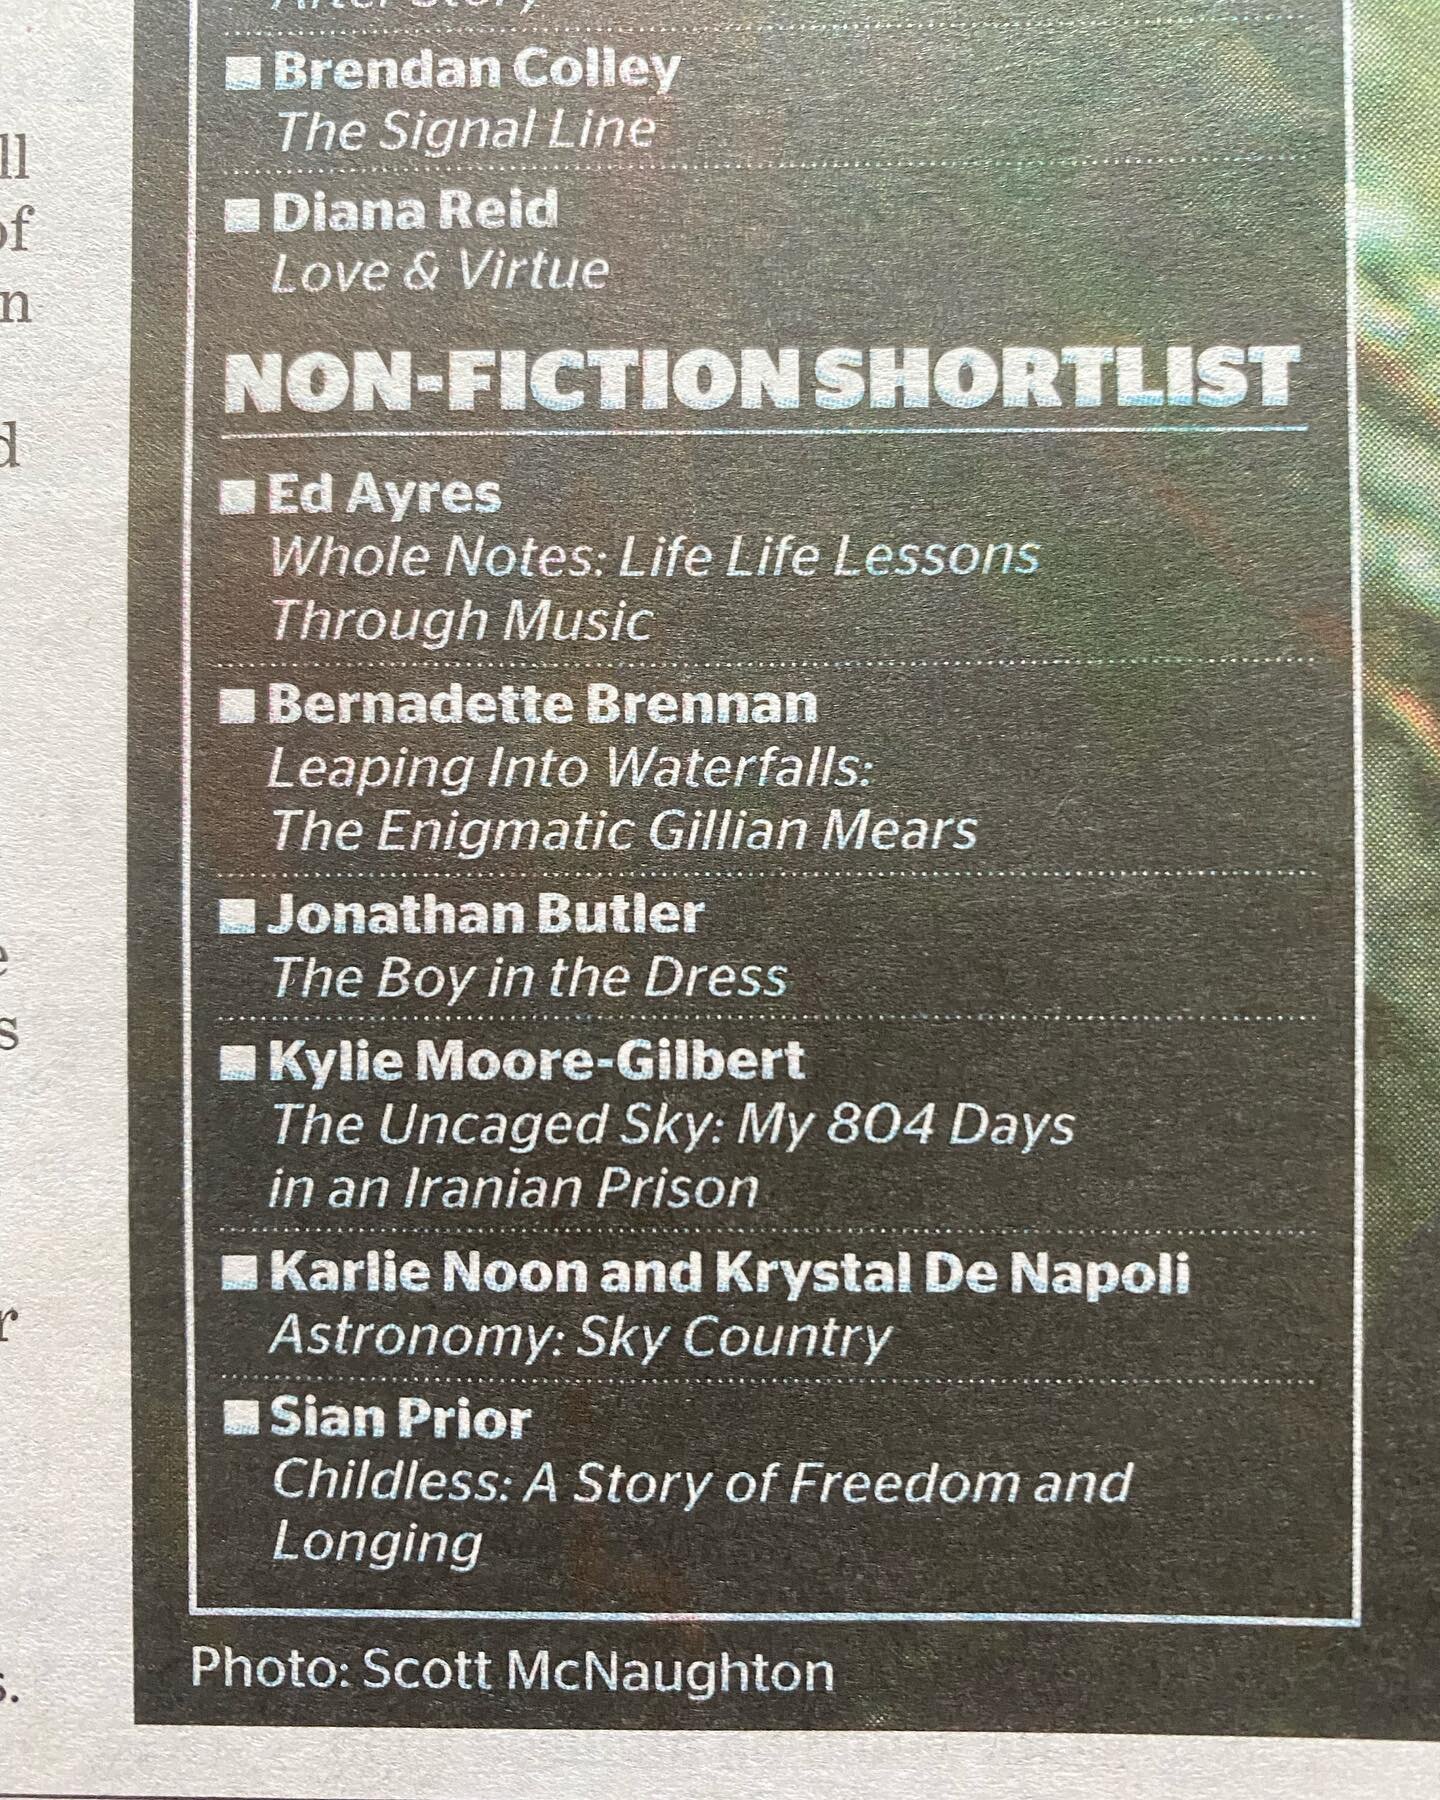 When I saw that The Boy in the Dress has been nominated for @theageaustralia non-fiction book of the year award online, I thought it was a typo. But it&rsquo;s also in print so I suppose it&rsquo;s true?! I&rsquo;m still reeling but I can&rsquo;t tha